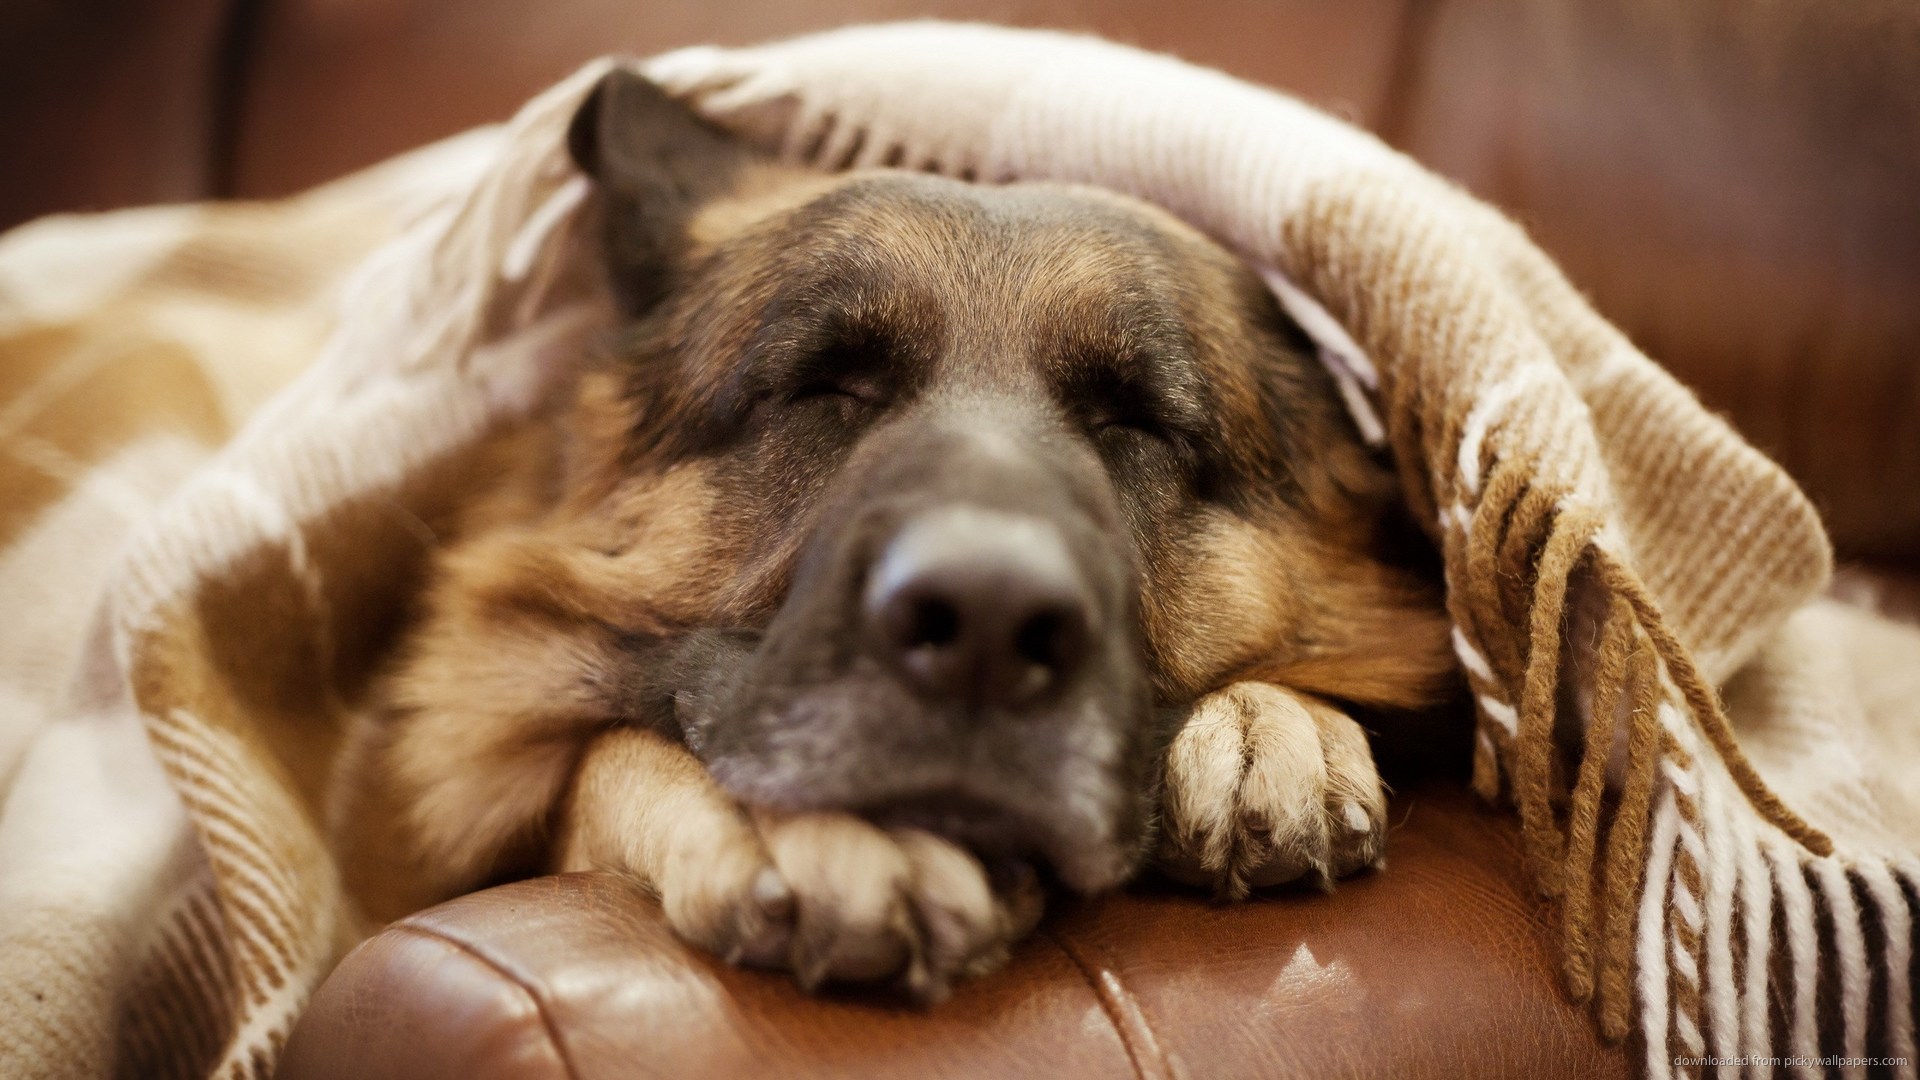 Adorable German Shepherd Sleeping On a Couch Wallpaper picture